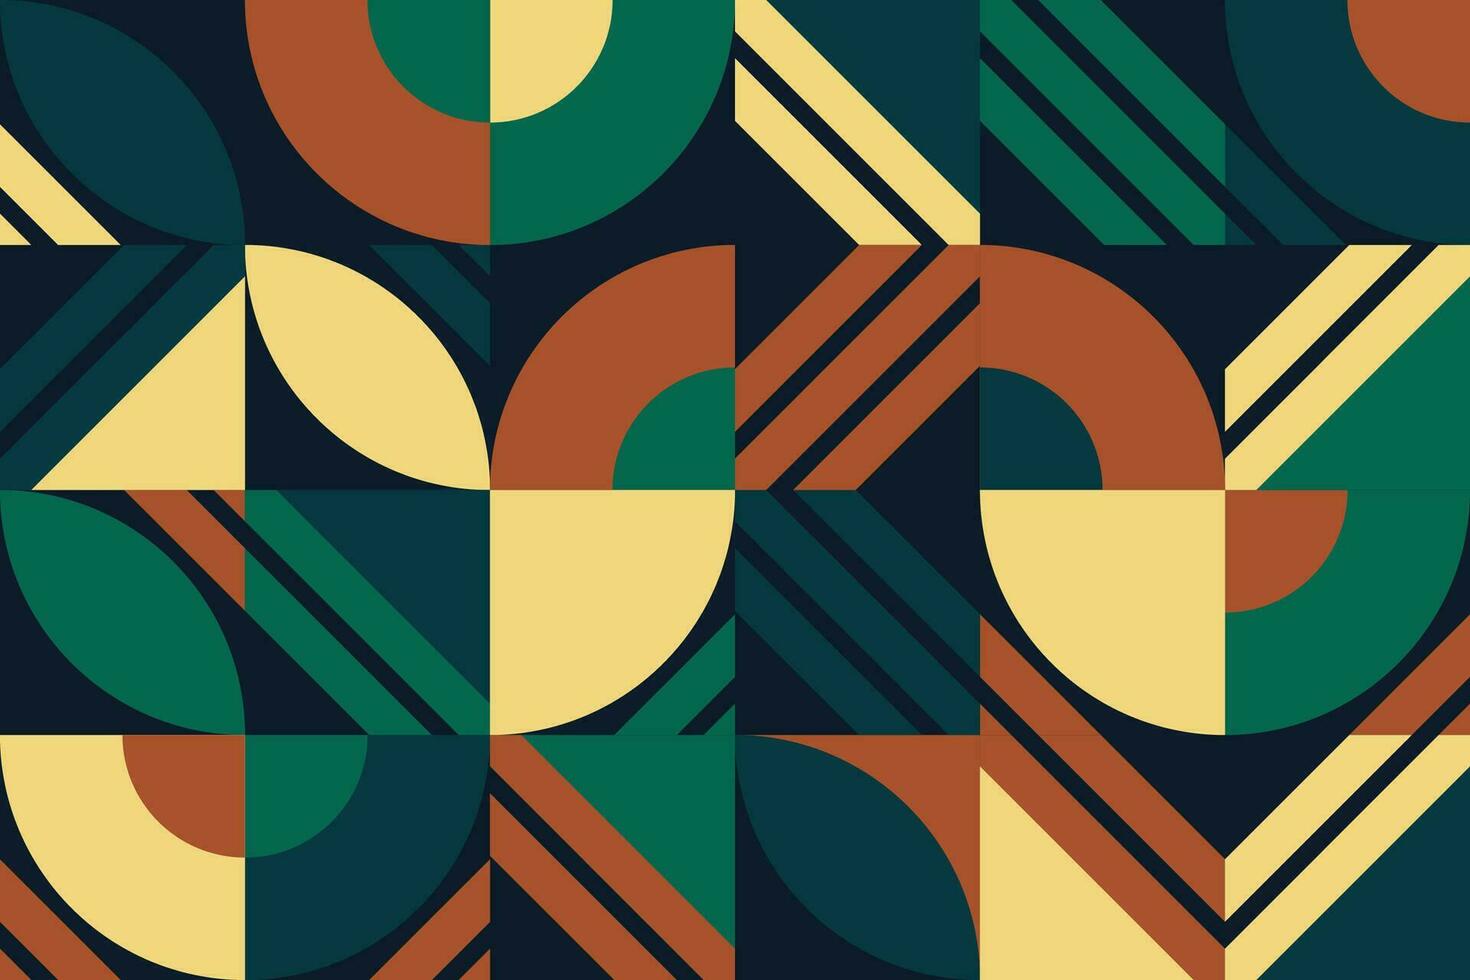 Modern abstract pattern with a retro twist, featuring bold geometric shapes and a seamless, decorative design in a Scandinavian-inspired, multi-colored palette vector